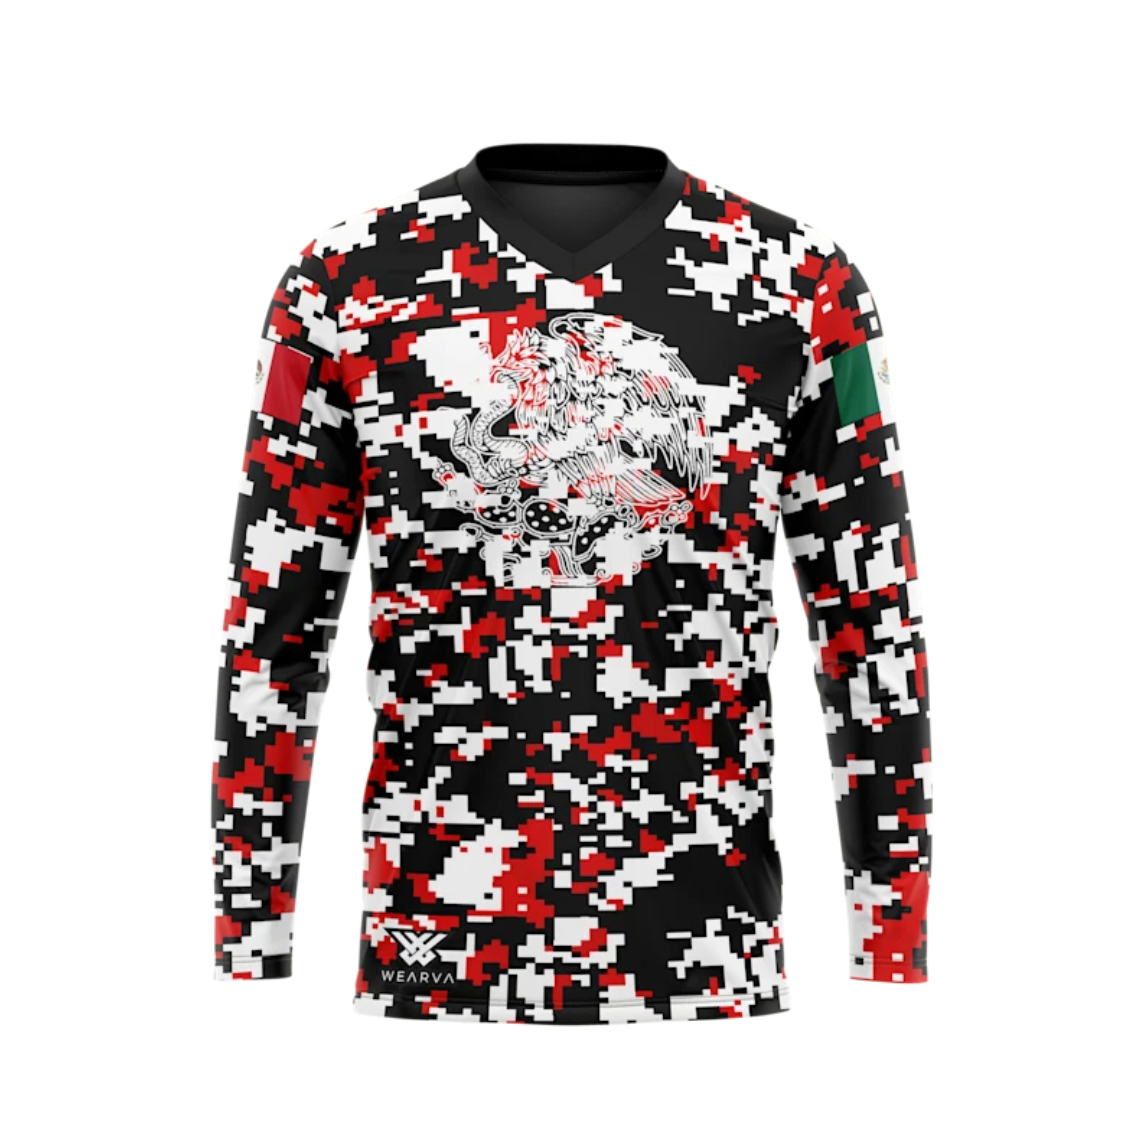 WEARVA Digi Camo with Eagle Off Road Jersey - XS